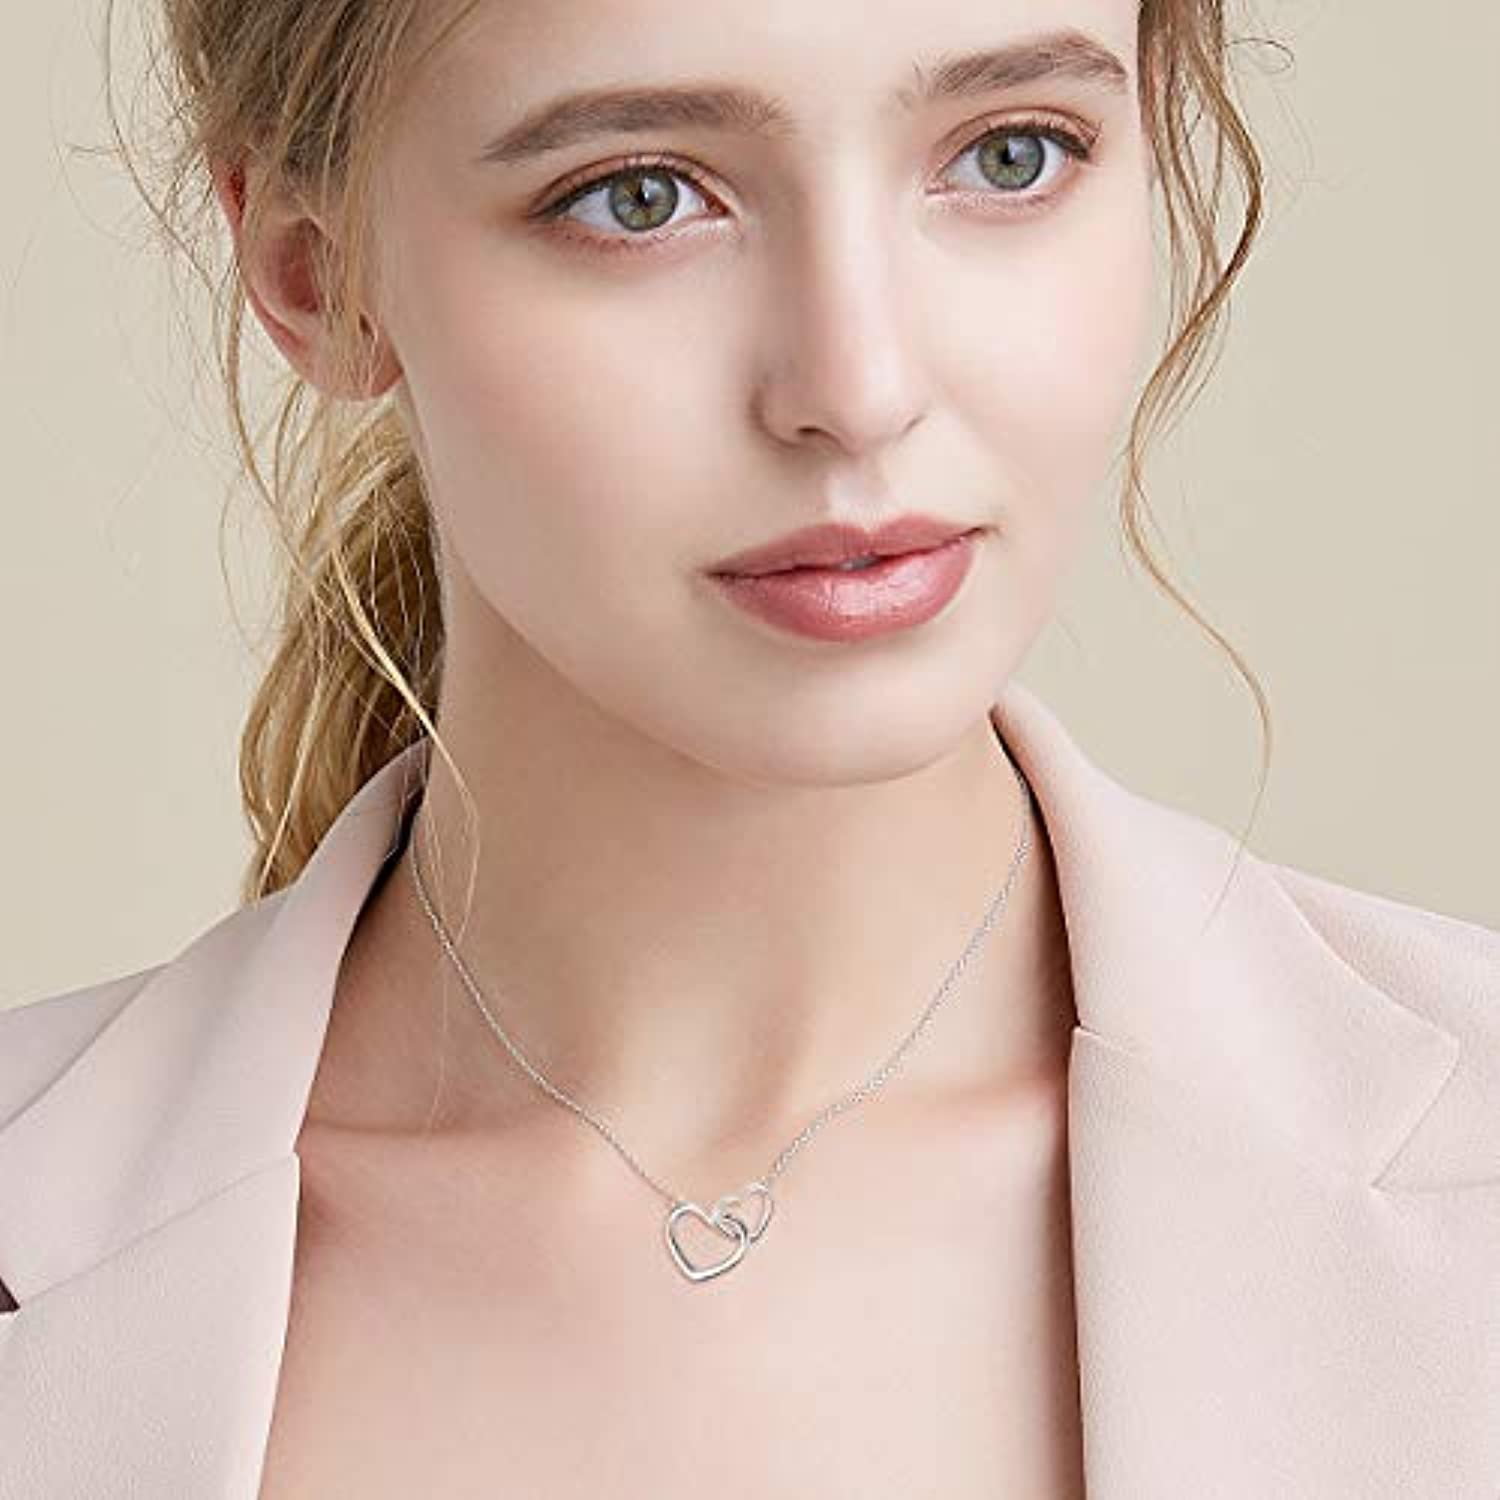 Lokaer Romantic Titanium Stainless Steel Double Heart Choker Necklaces  Jewelry Fashion Chain Pendant Necklace For Women N21143